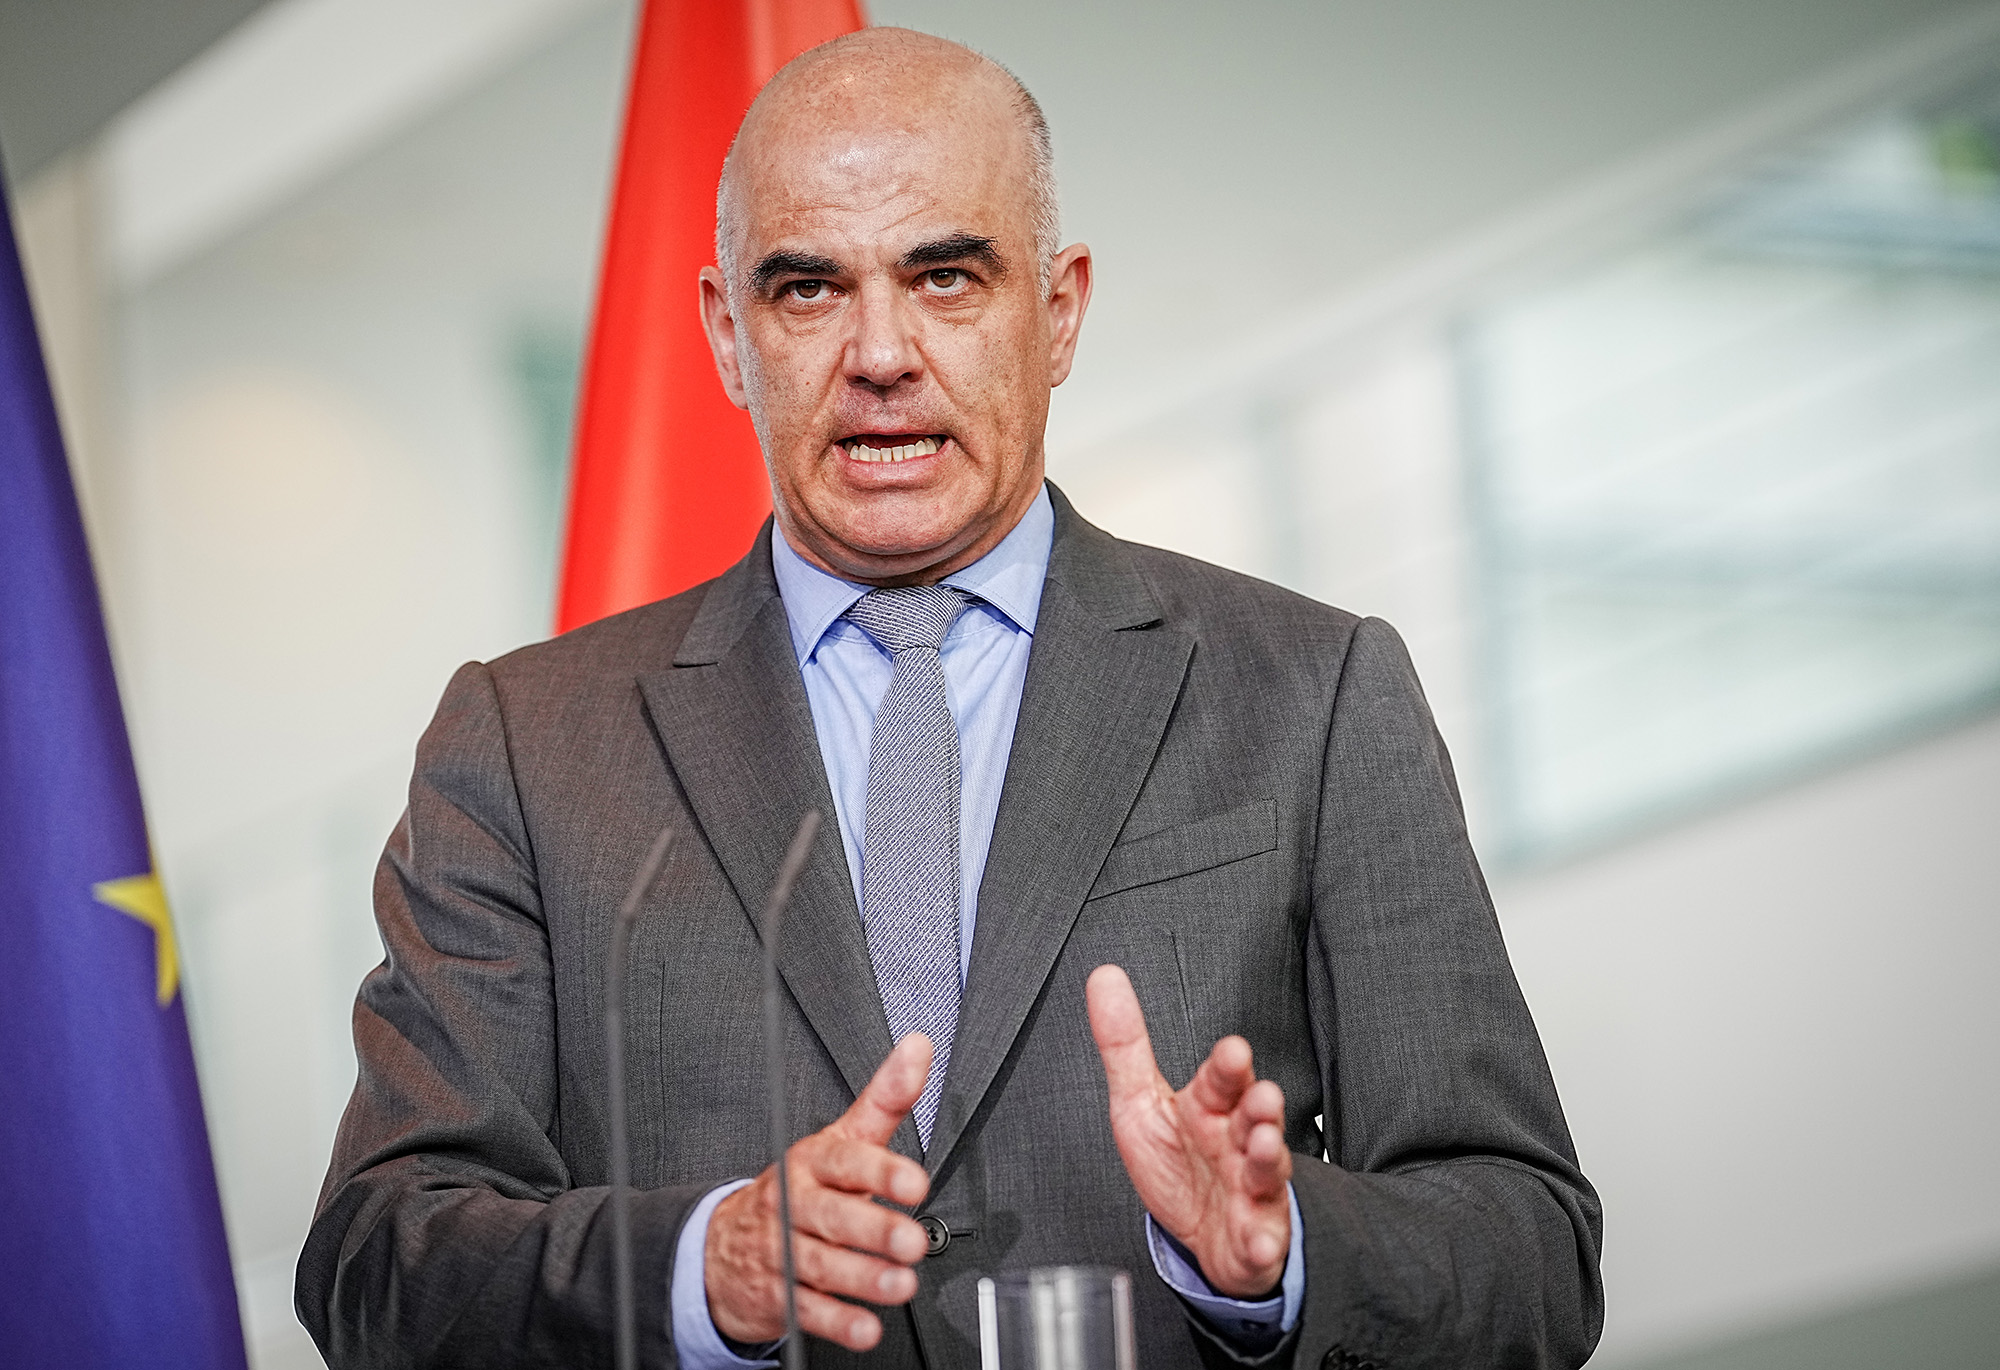 Alain Berset, President of the Swiss Confederation, gives a press conference at the Federal Chancellery in Berlin, Germany, on April 18.